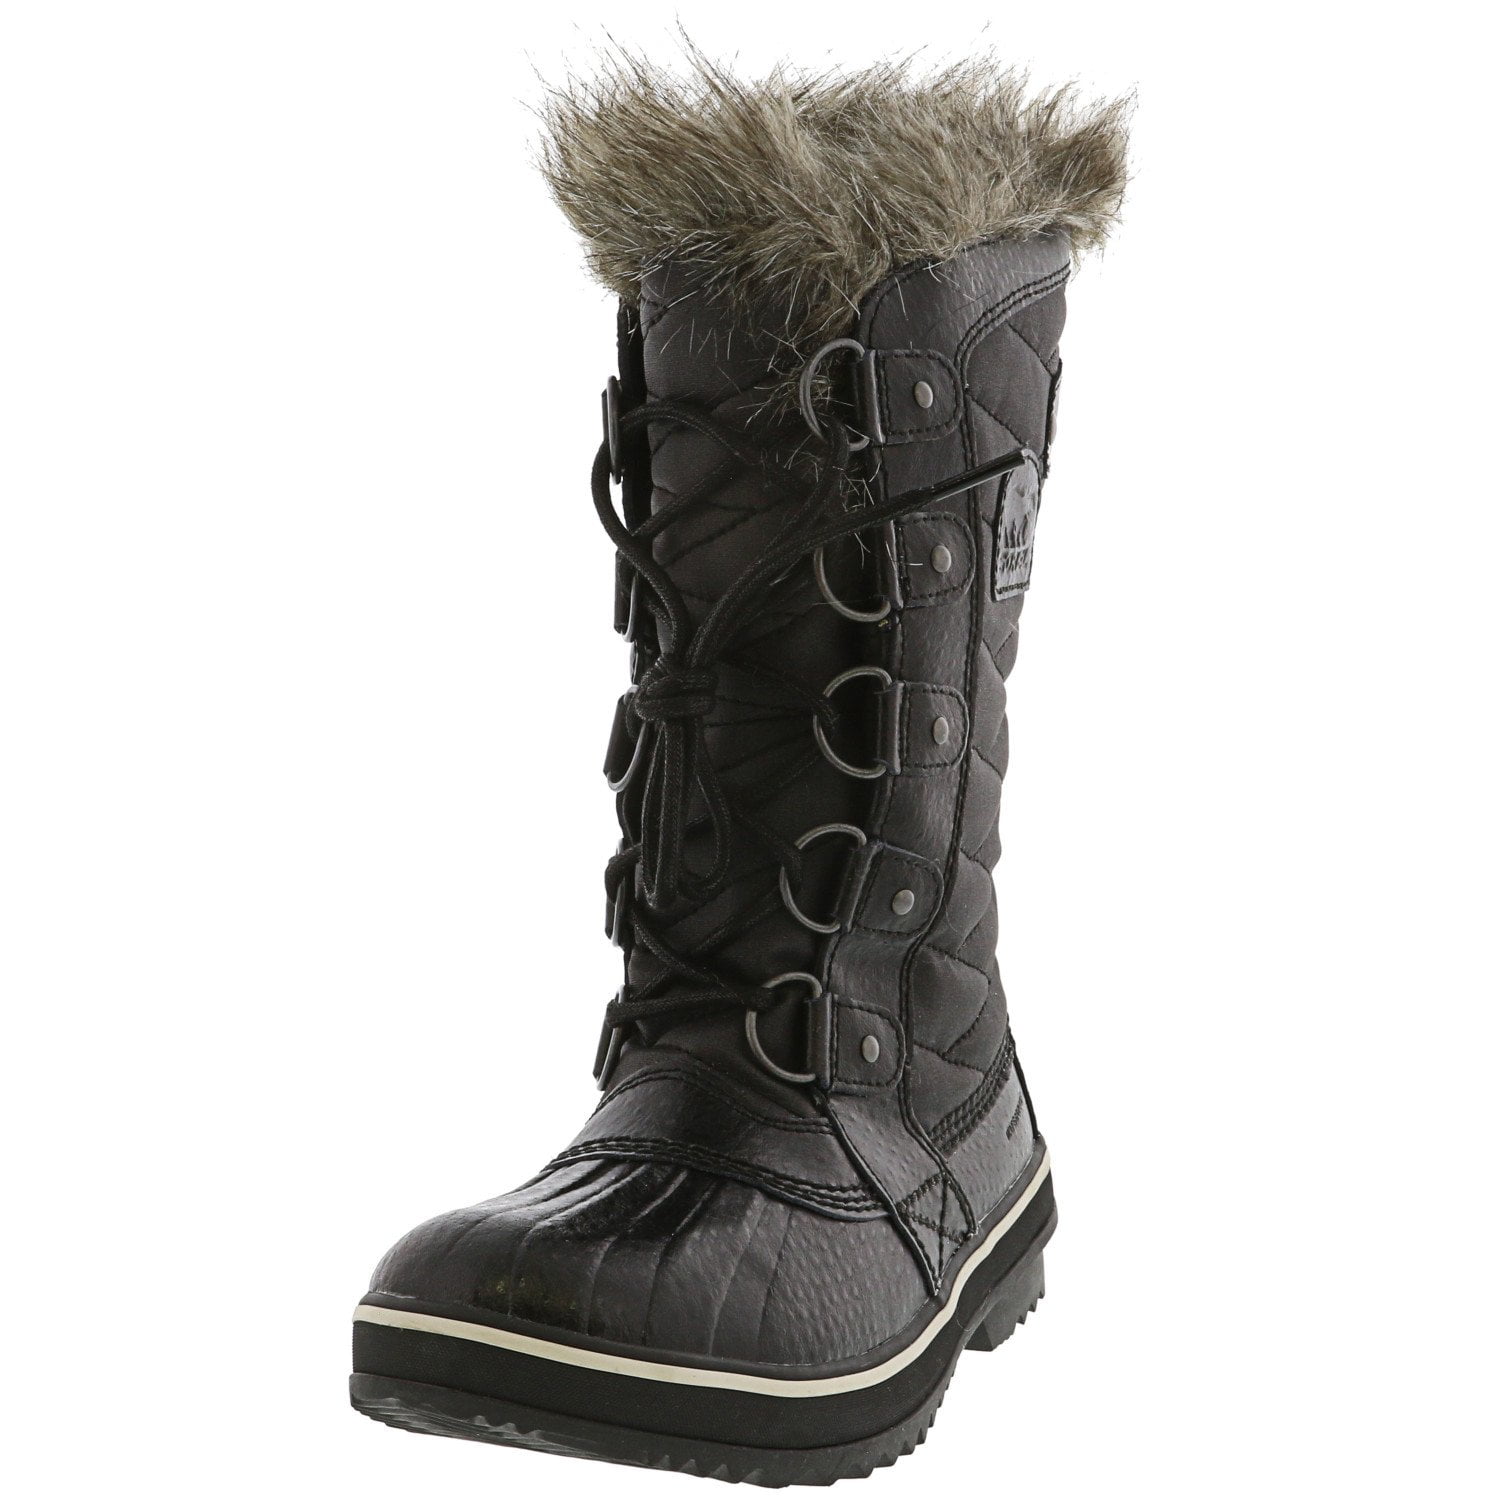 Waterproof Sorel Youth Tofino II Boot for Light Rain and Snow Black Size 7 Quarry